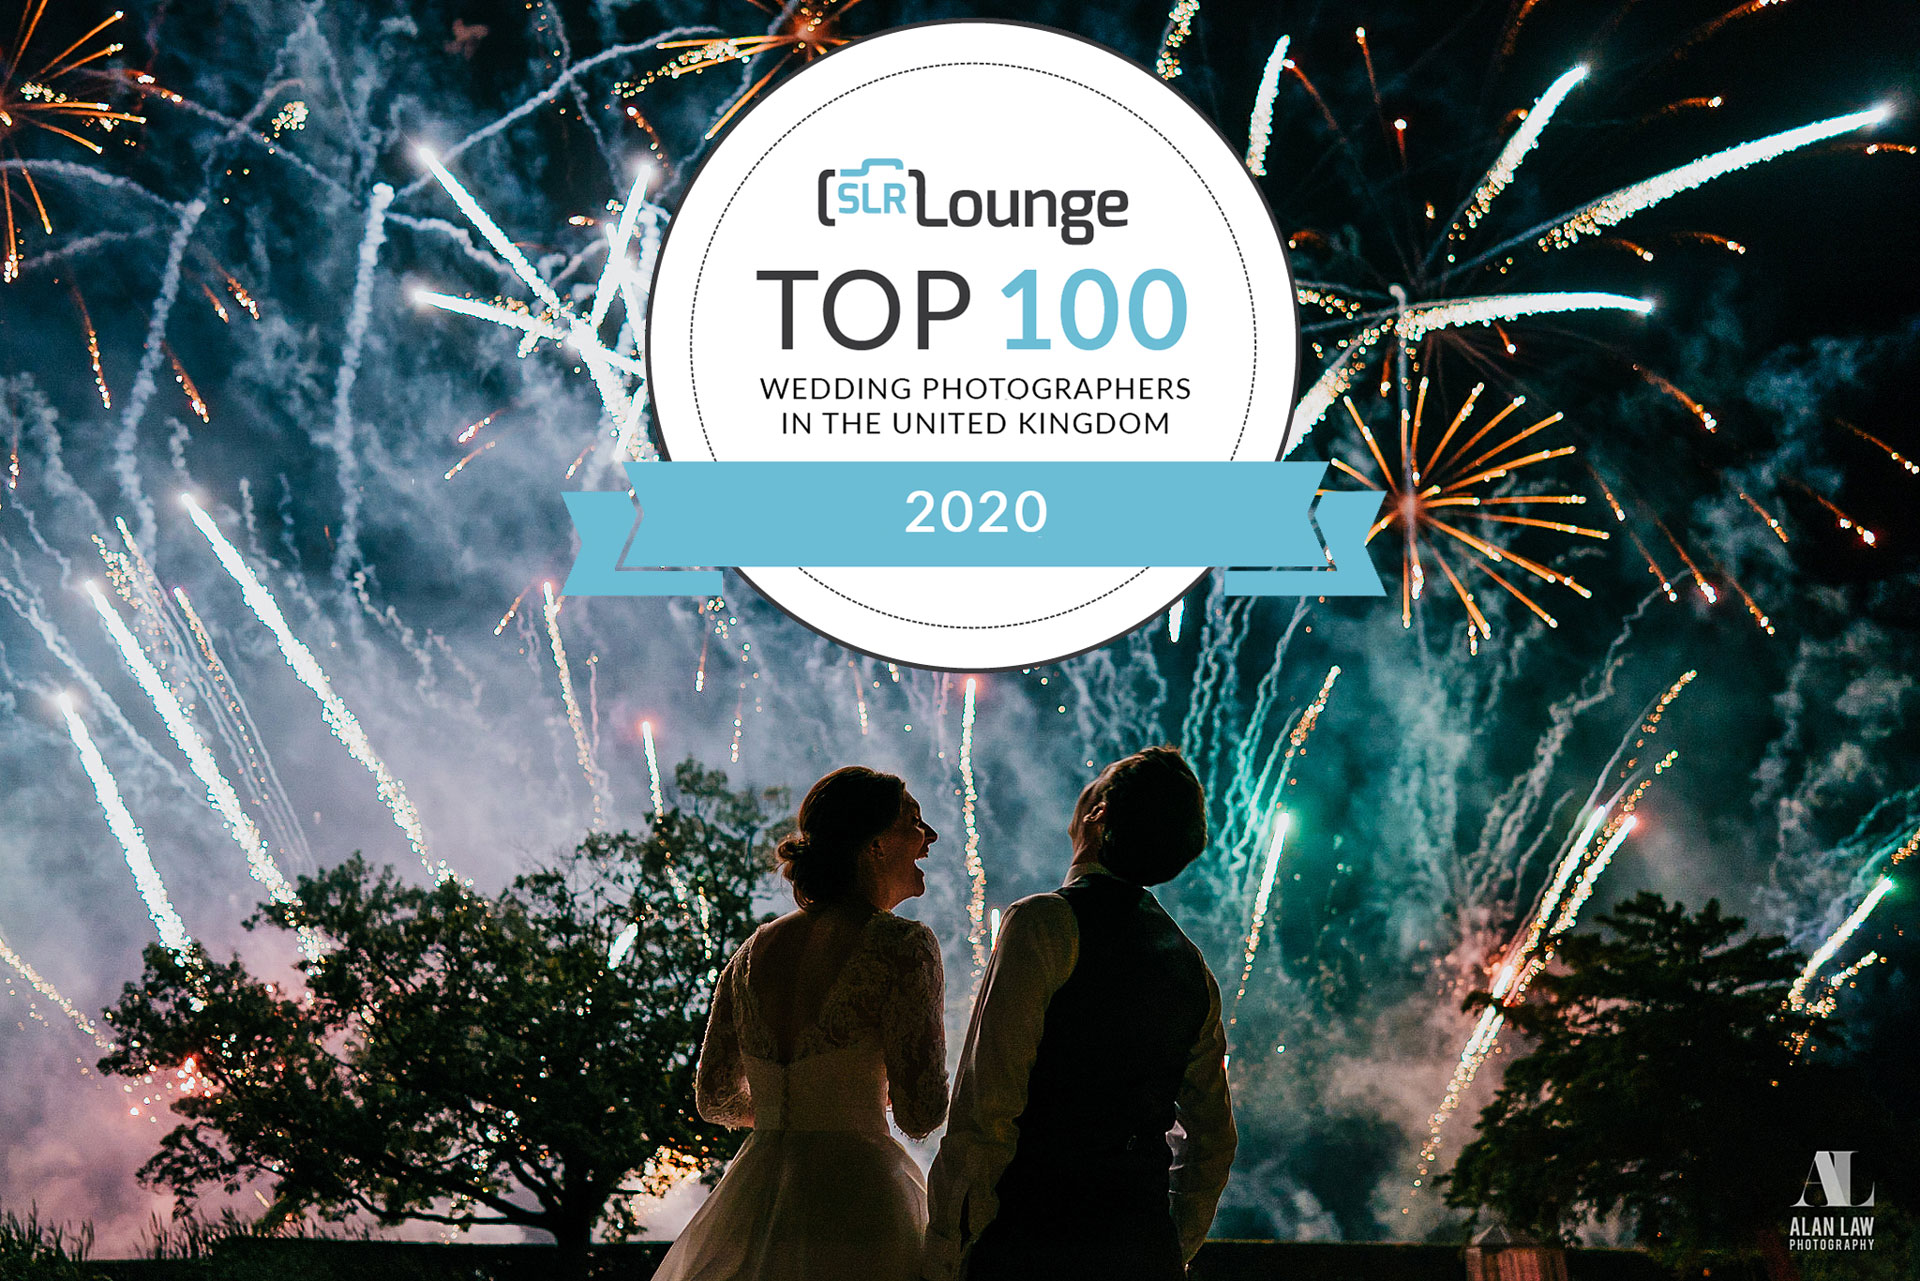 Named one of the ‘Top 100 Wedding Photographers in the UK’